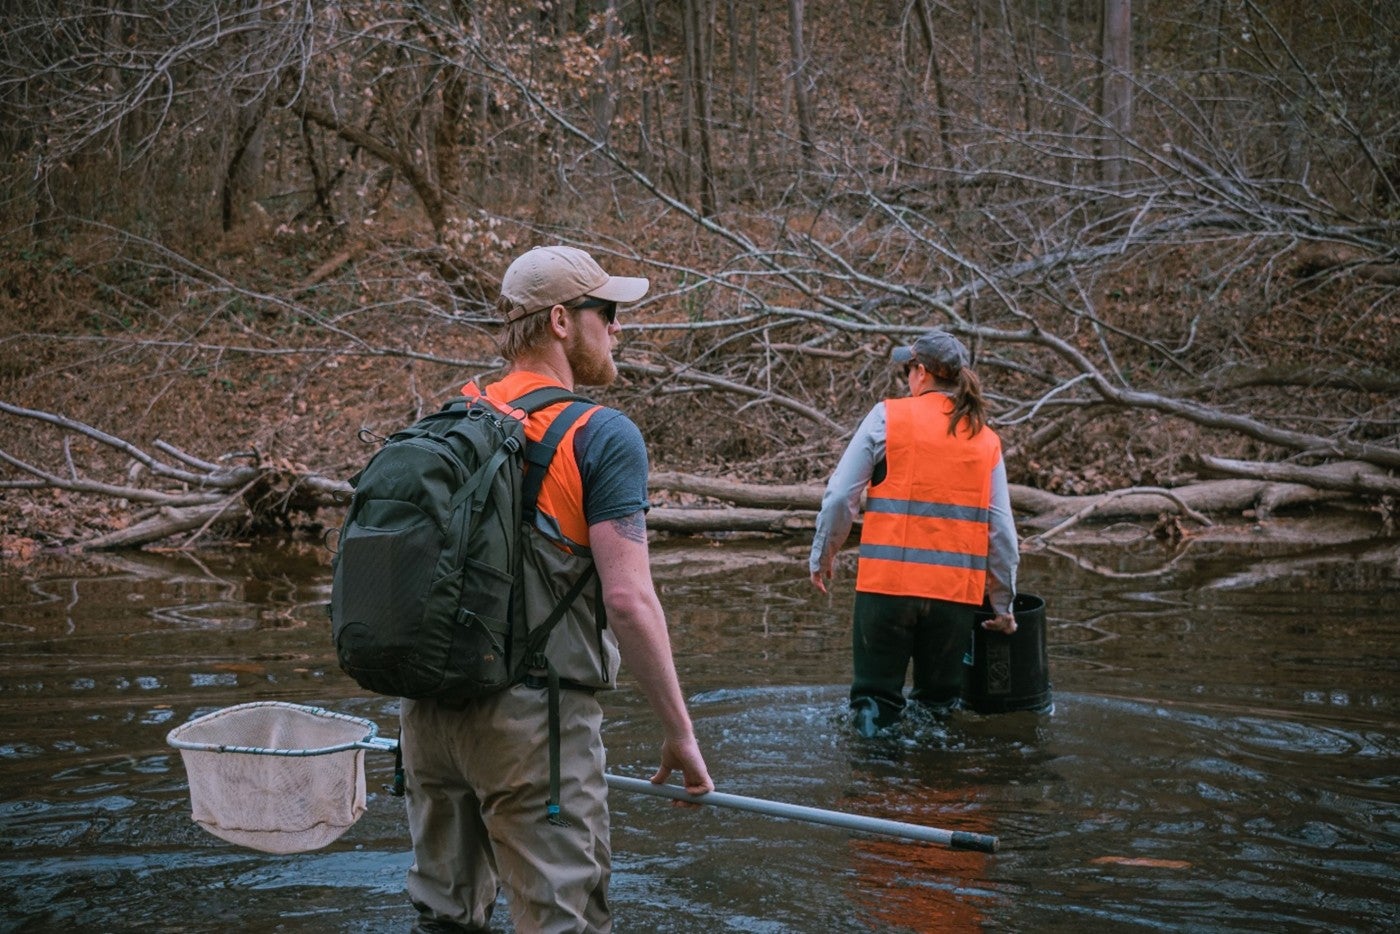 Researchers in waders and vests hold nets and buckets as they walk through a stream in a forest